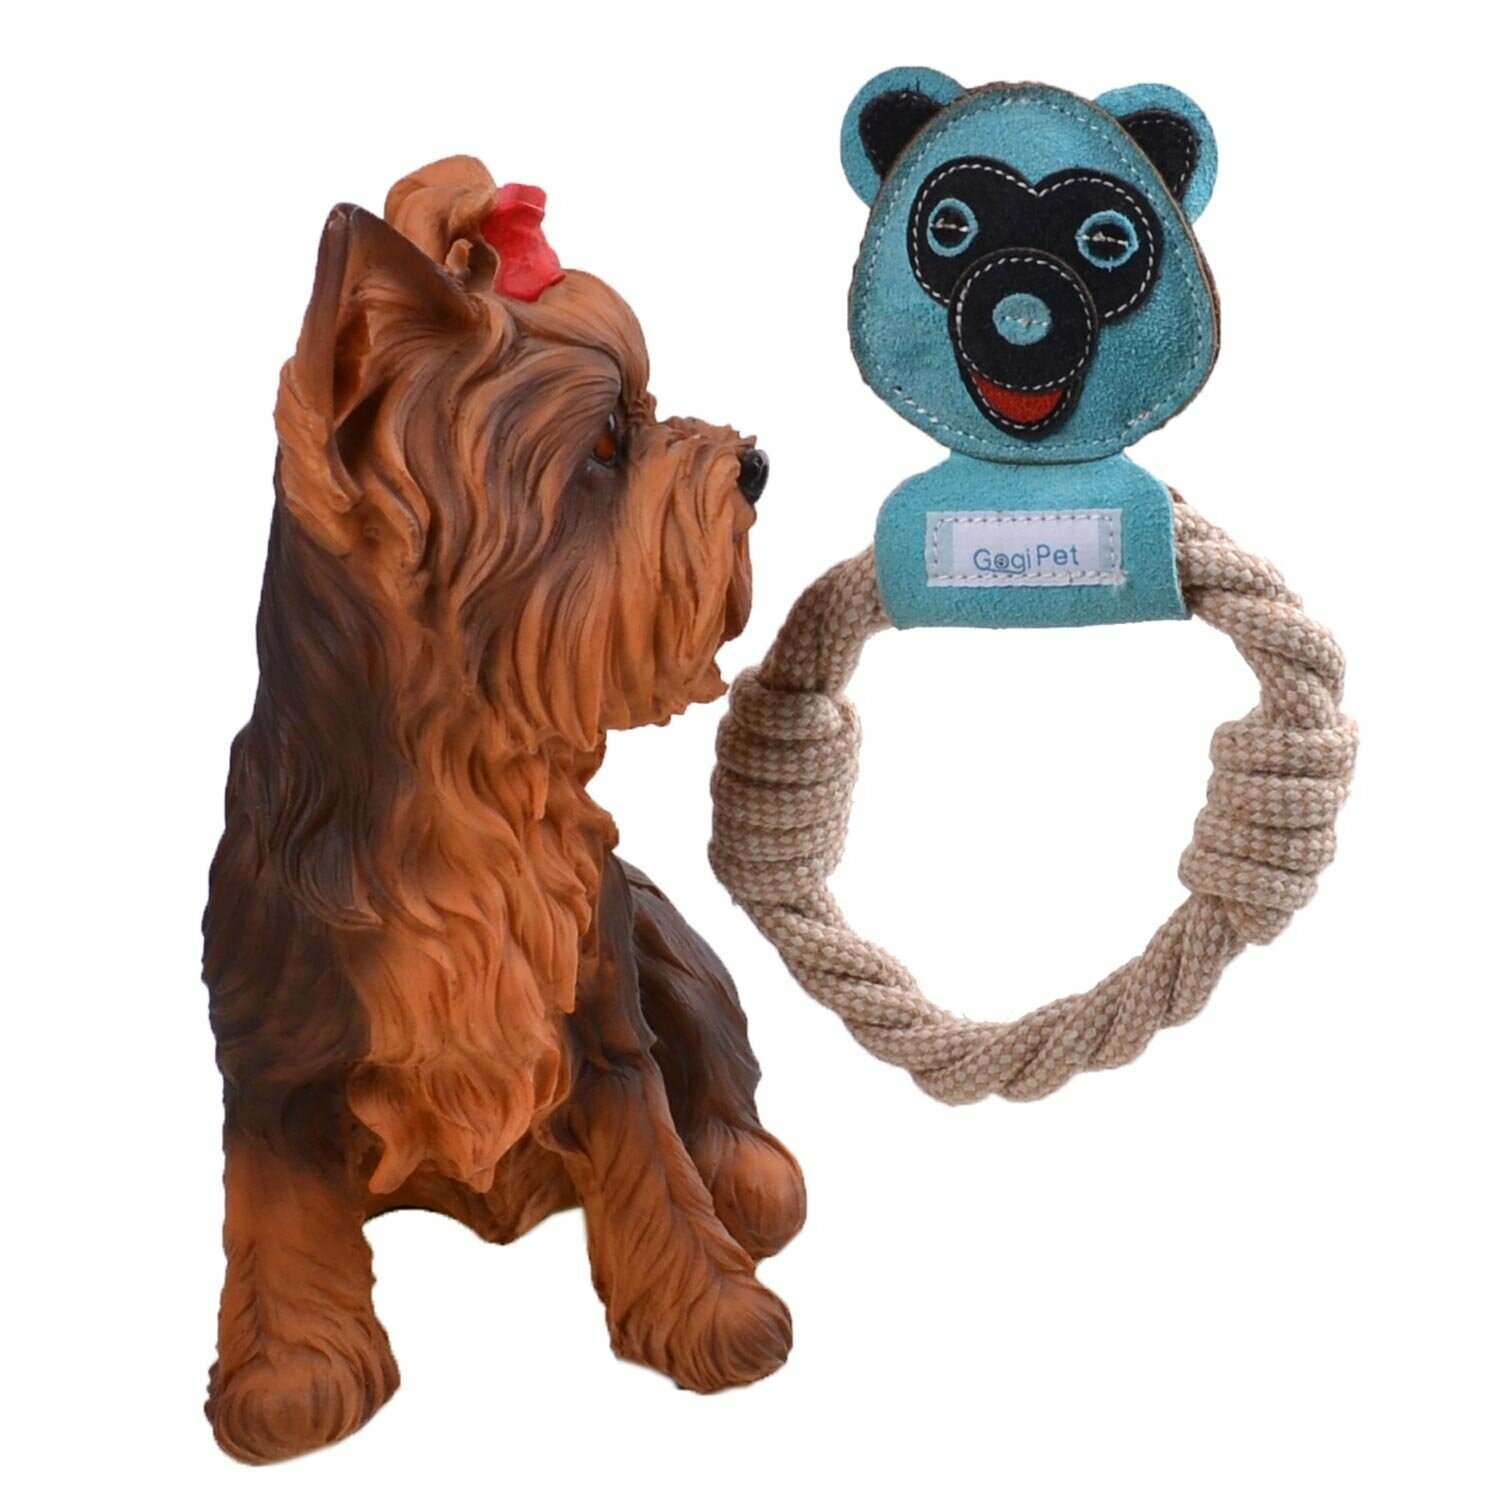 Innovative dog toy without chemical dyes